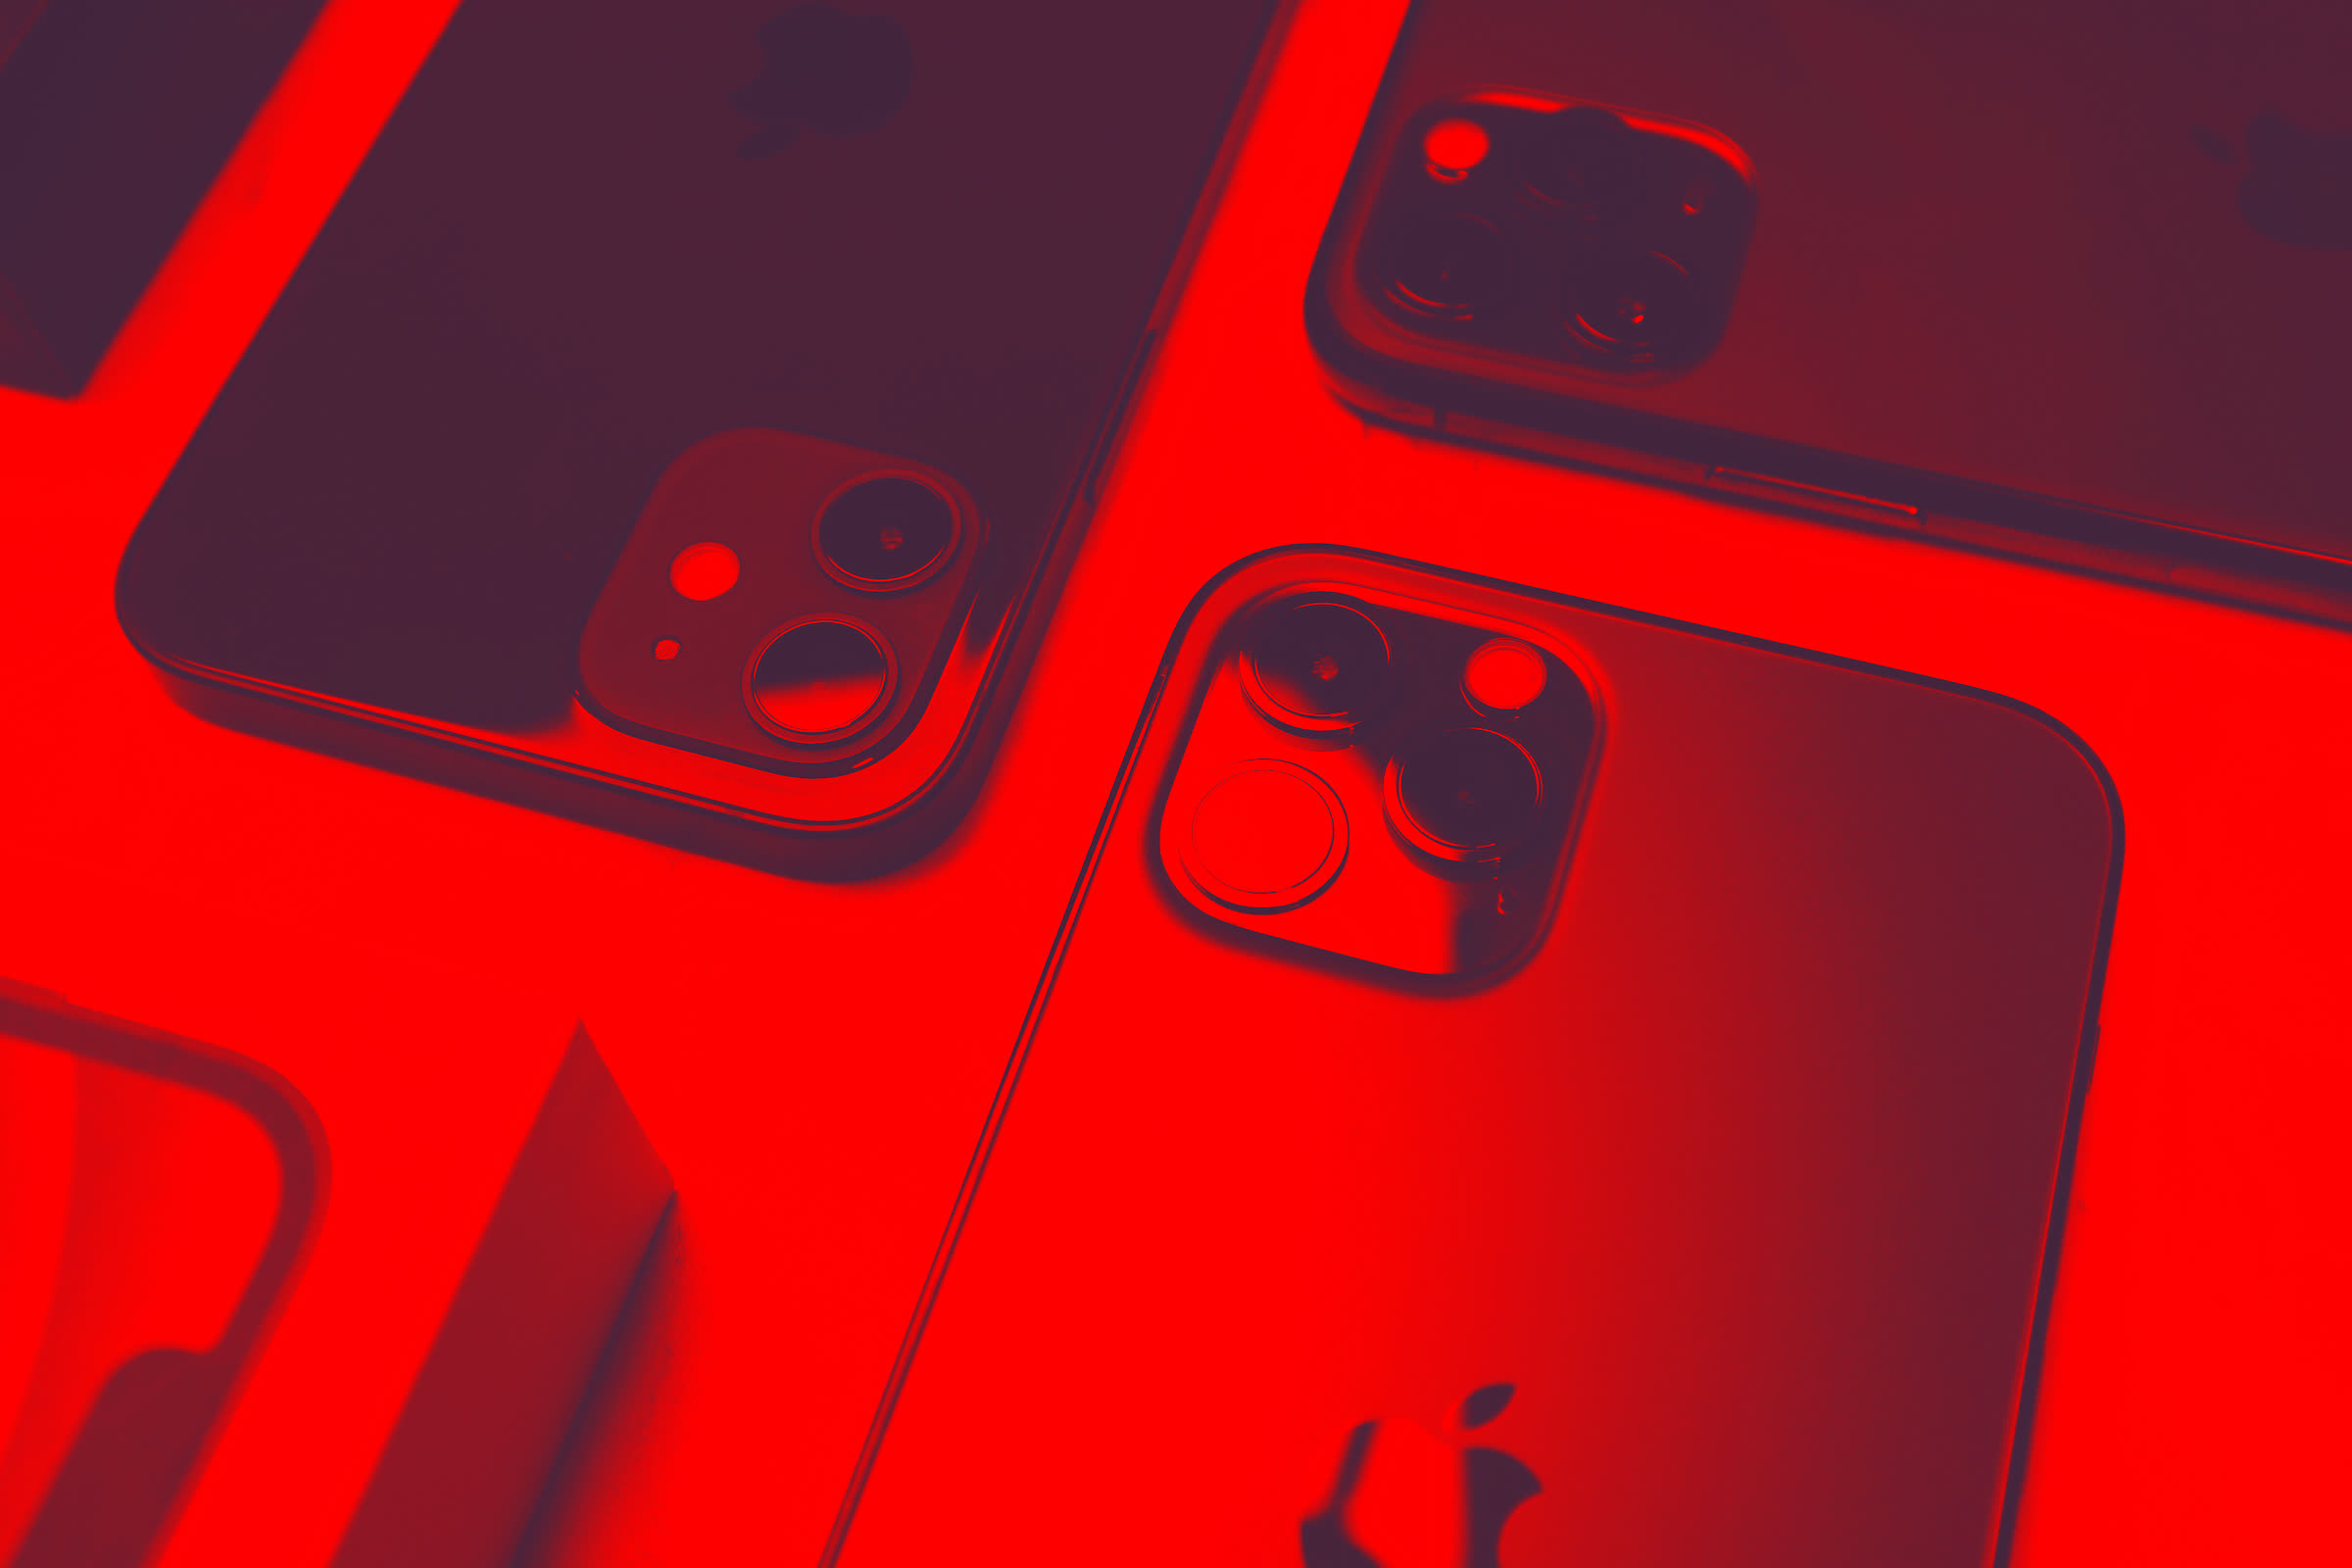 Apple iPhone zero-click exploit has been infecting phones with 'Triangulation' spyware since 2019